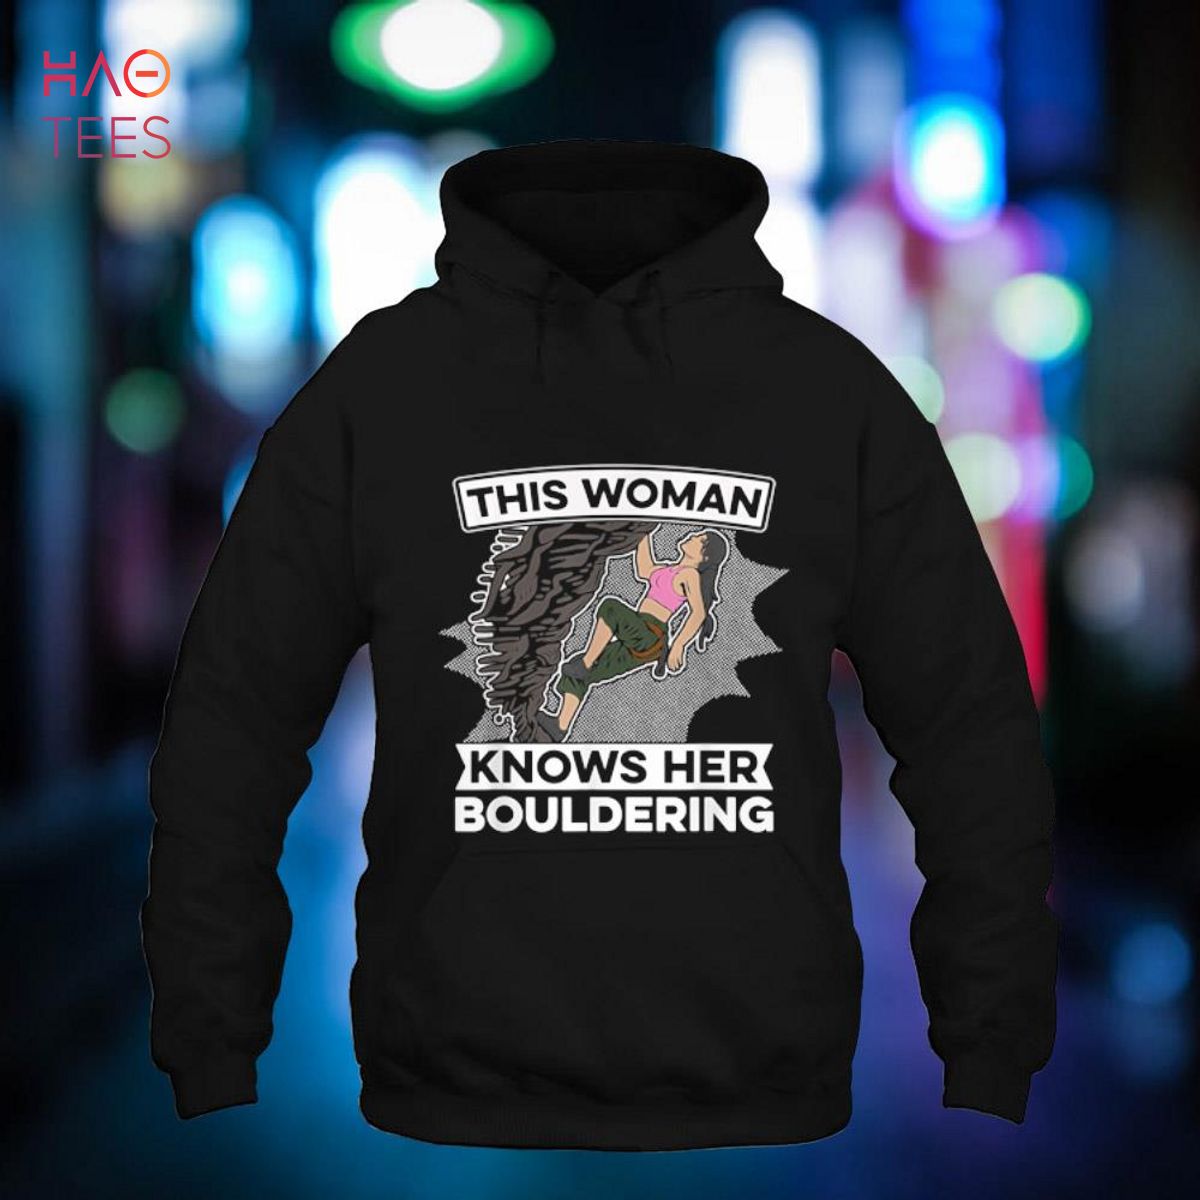 This Woman Knows Her Bouldering - Climber Boulder Bouldering Shirt